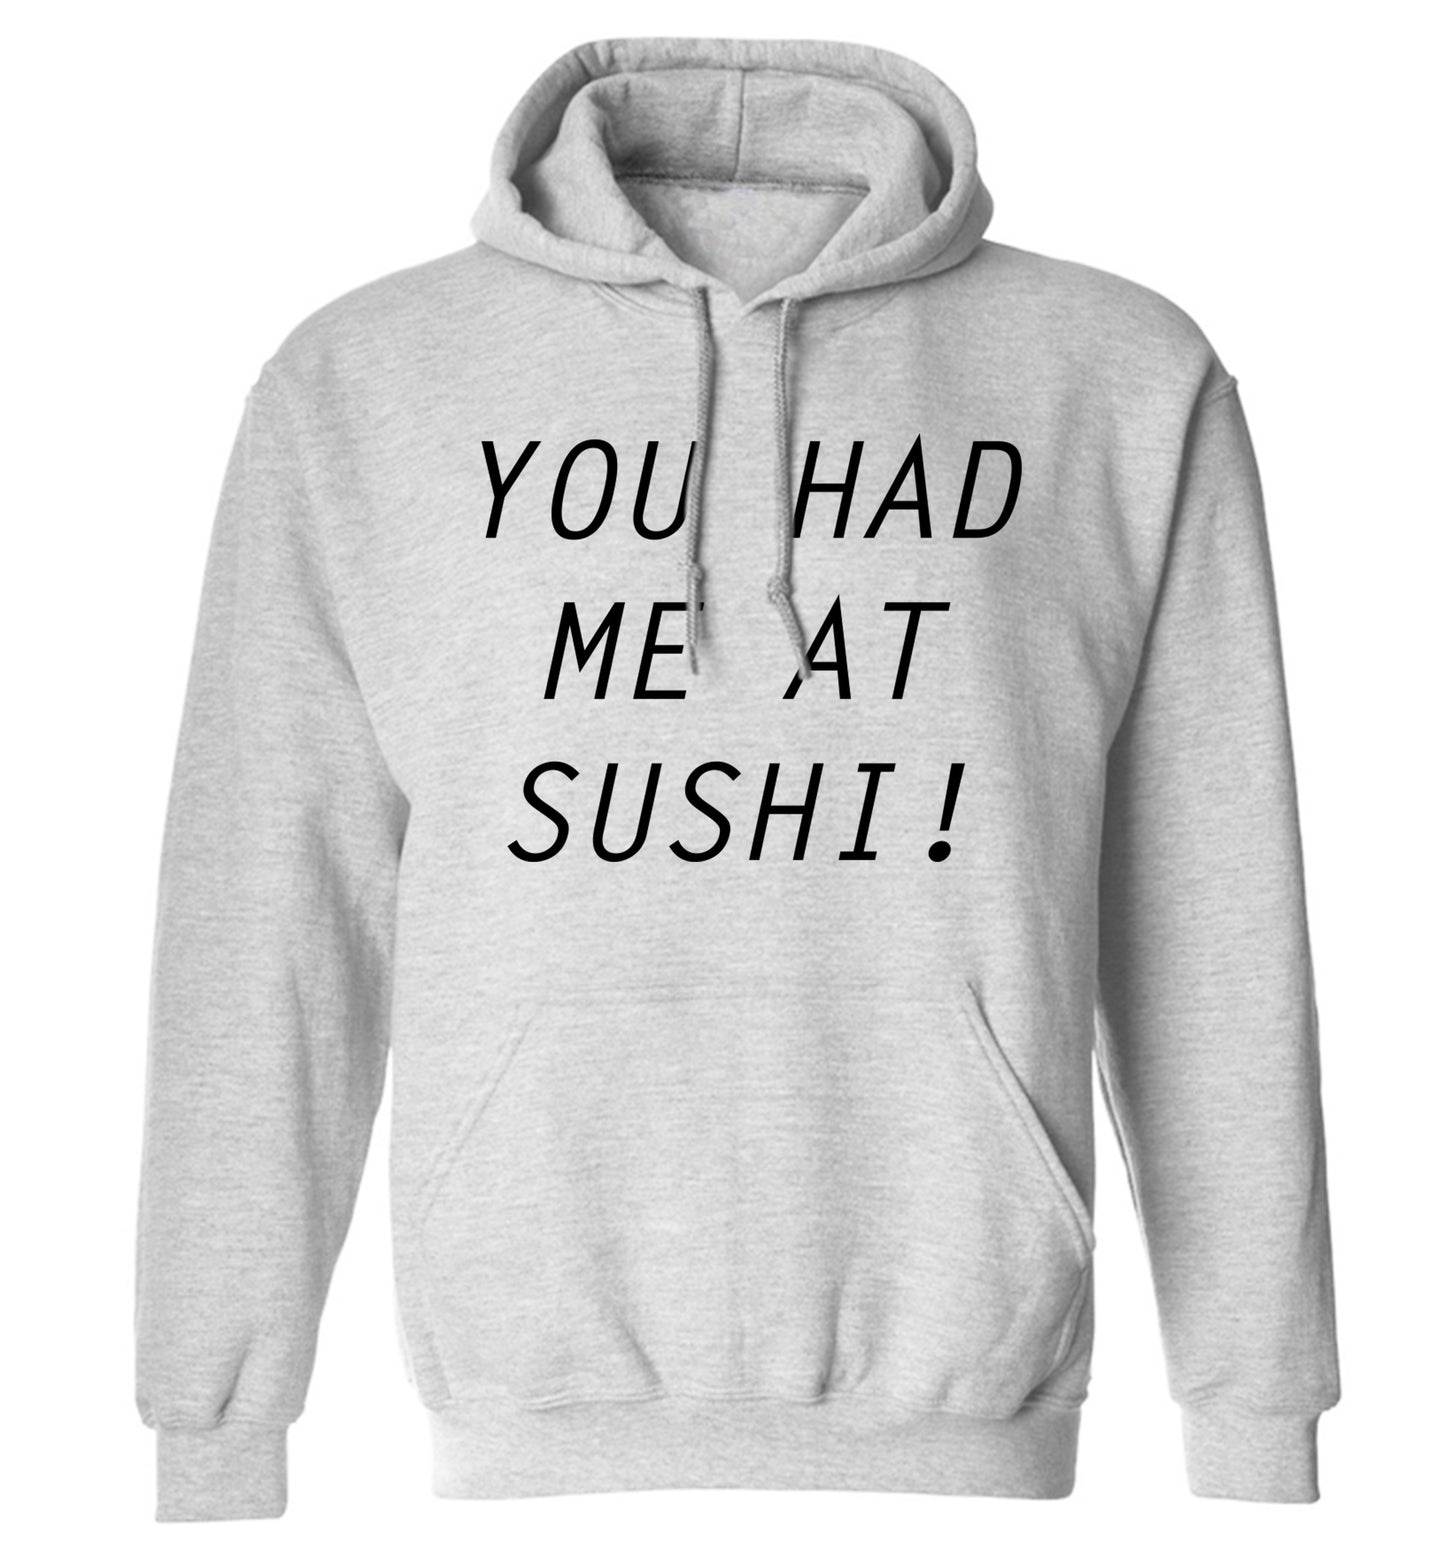 You had me at sushi adults unisex grey hoodie 2XL